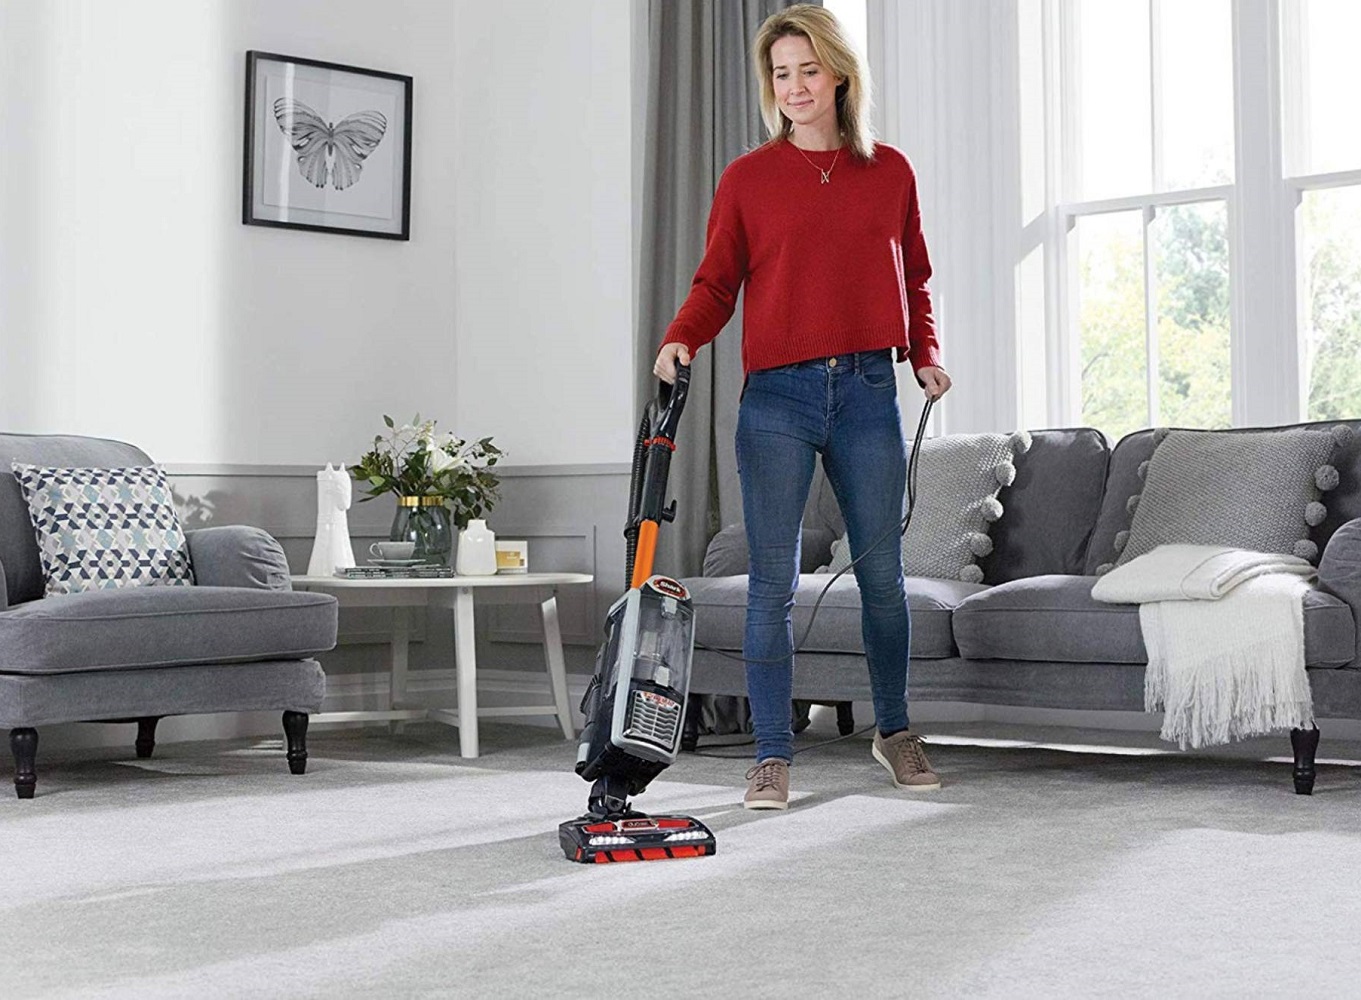 7 Best Upright Vacuum Cleaners for January 2022 | Check Reviews